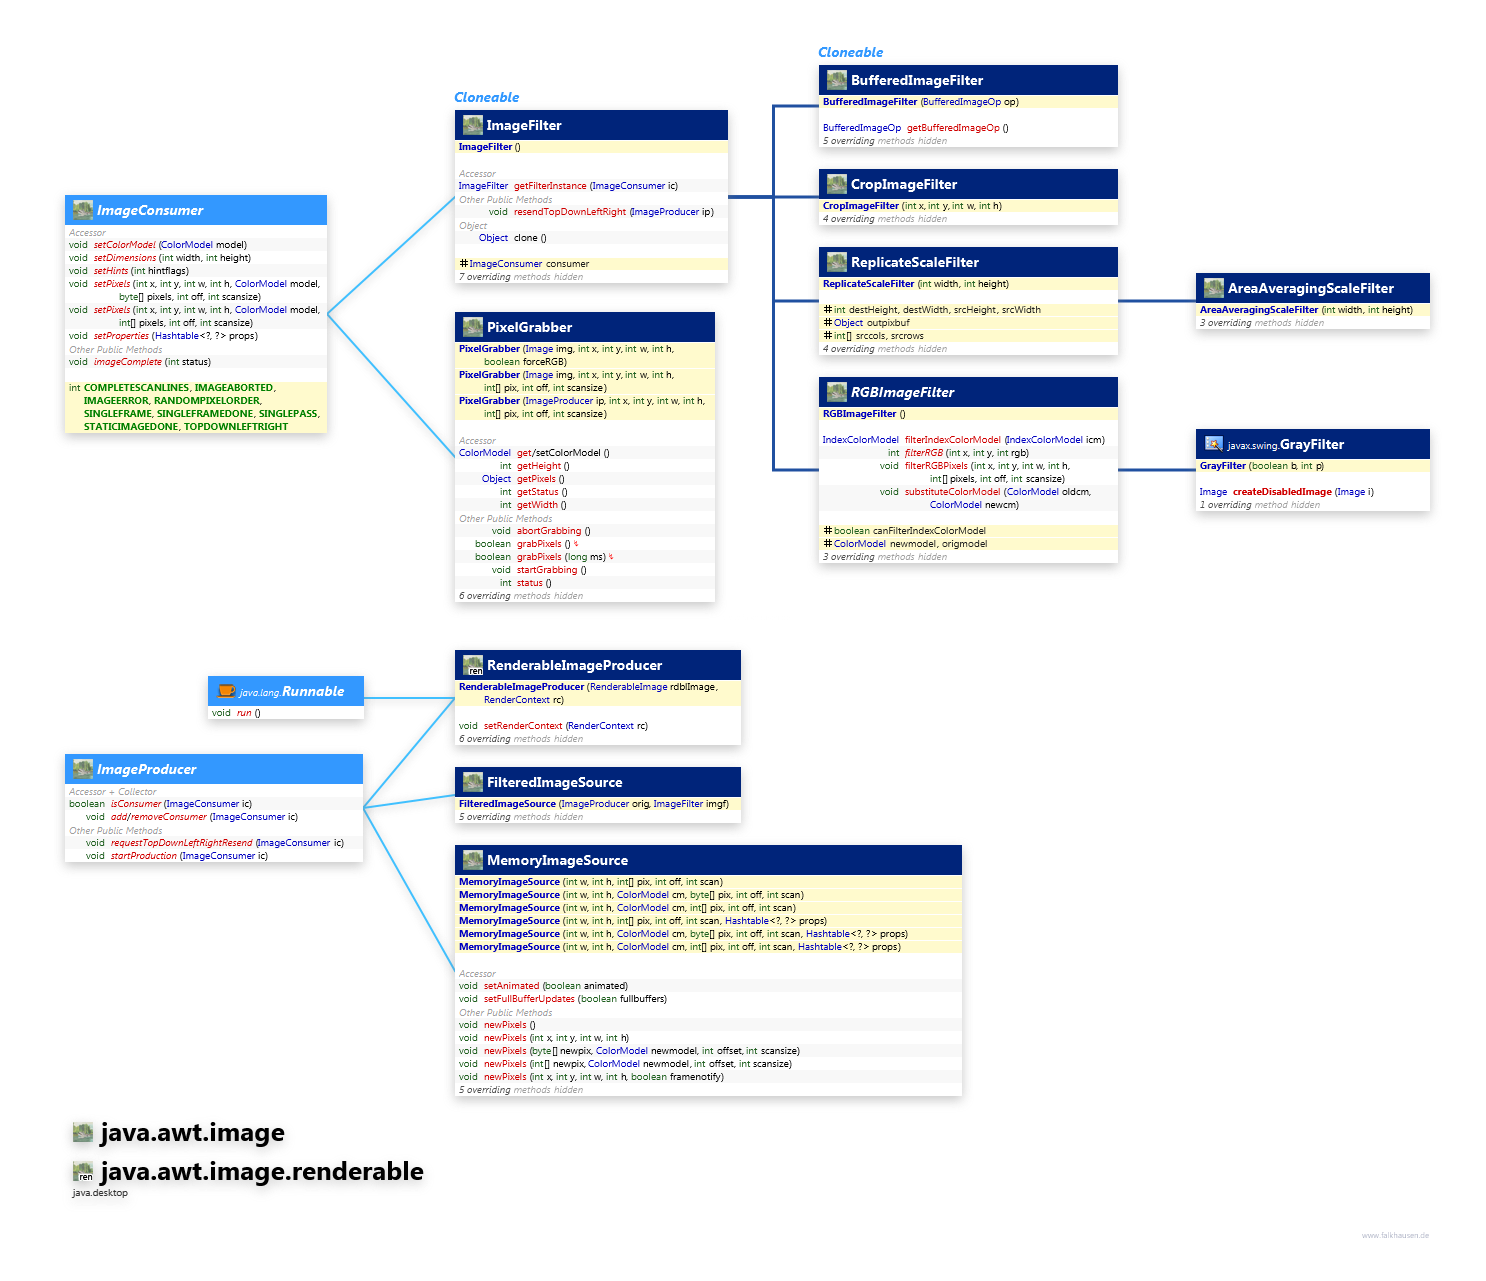 java.awt.image java.awt.image.renderable Consumer, Producer class diagram and api documentation for Java 10